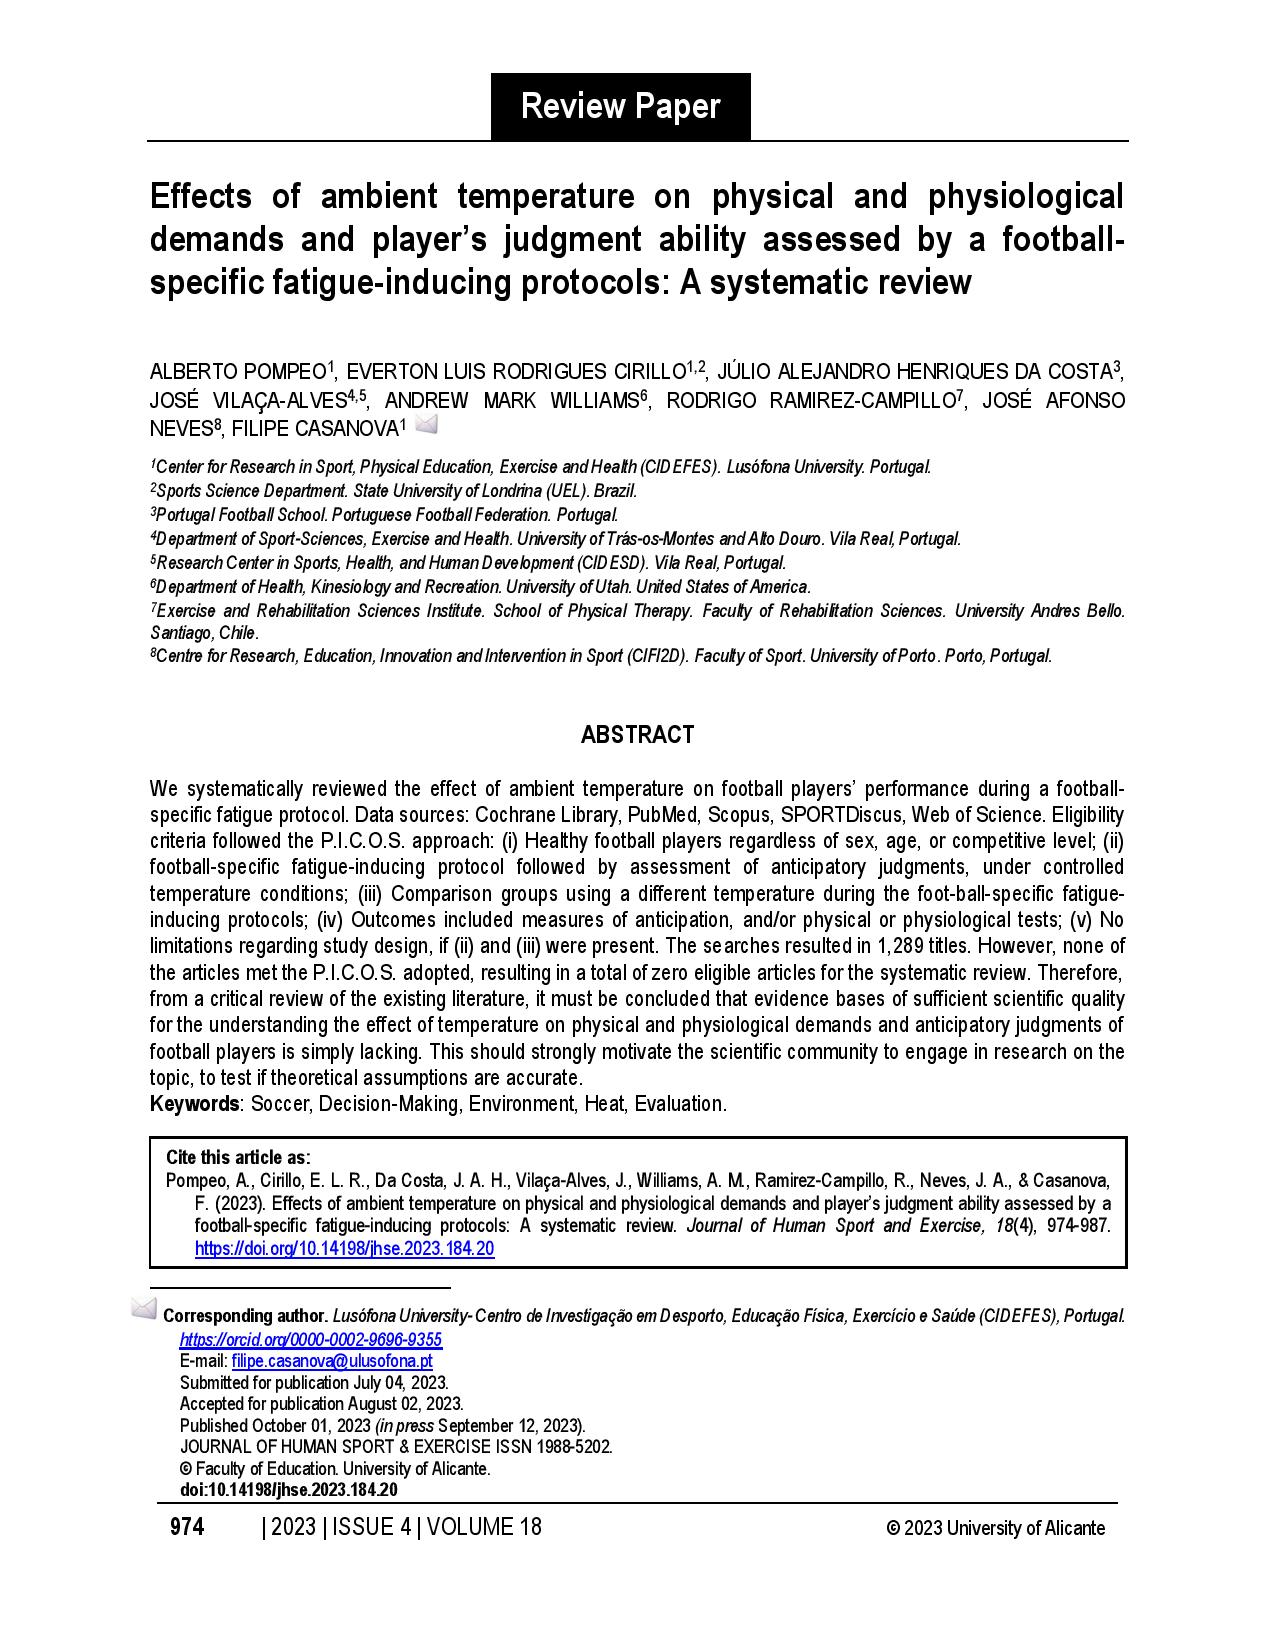 Effects of ambient temperature on physical and physiological demands and player’s judgment ability assessed by a football-specific fatigue-inducing protocols: A systematic review